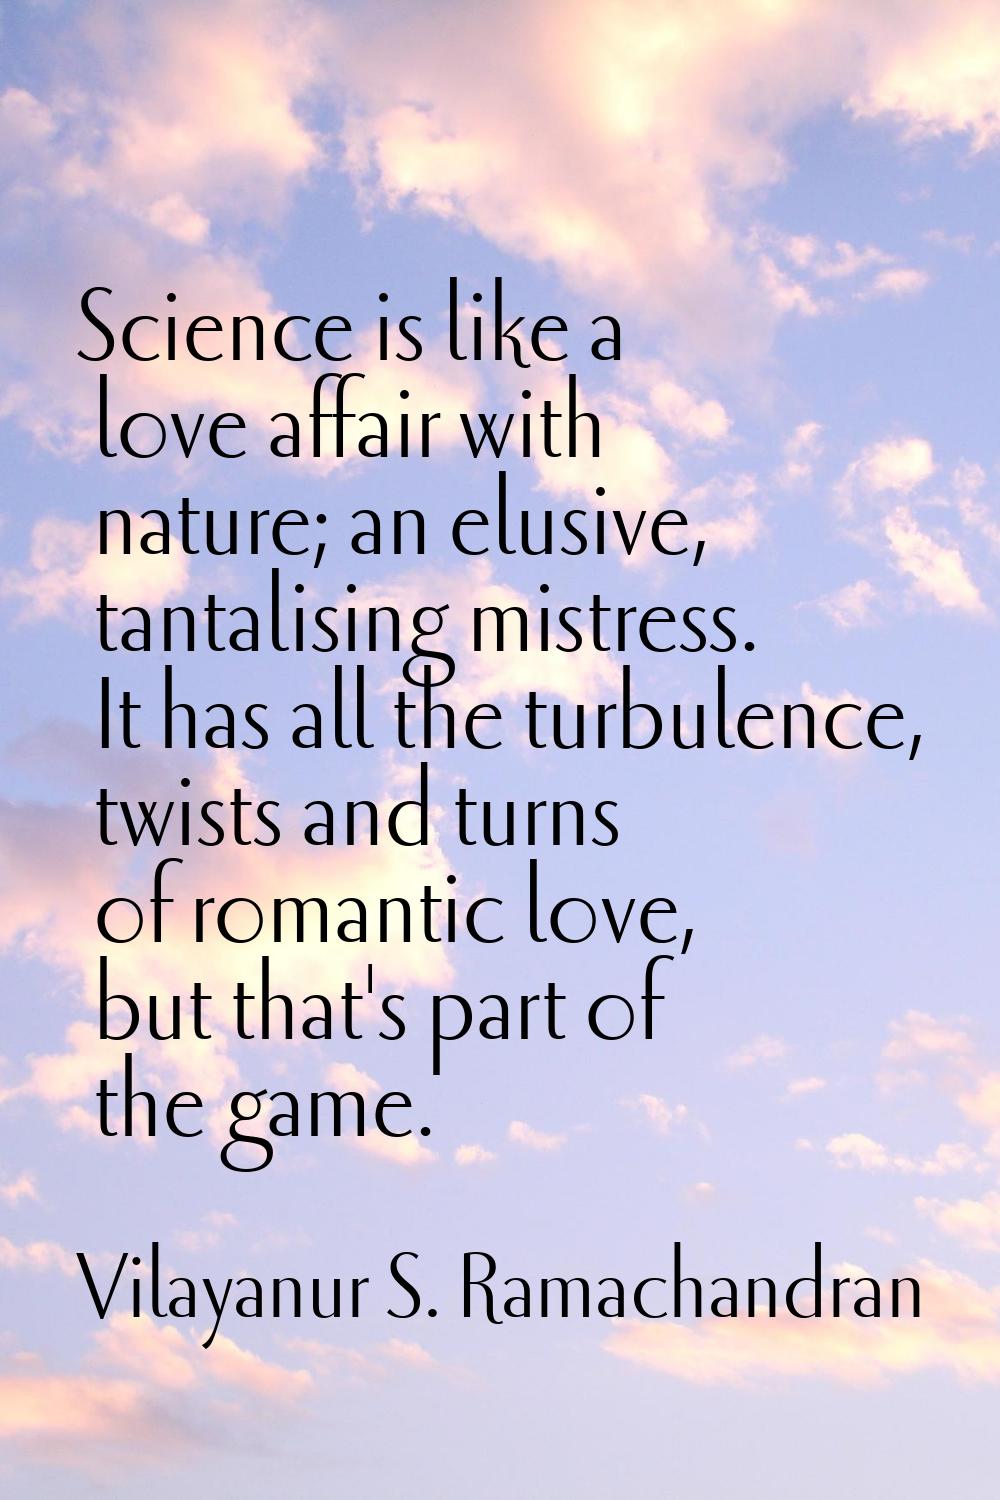 Science is like a love affair with nature; an elusive, tantalising mistress. It has all the turbule